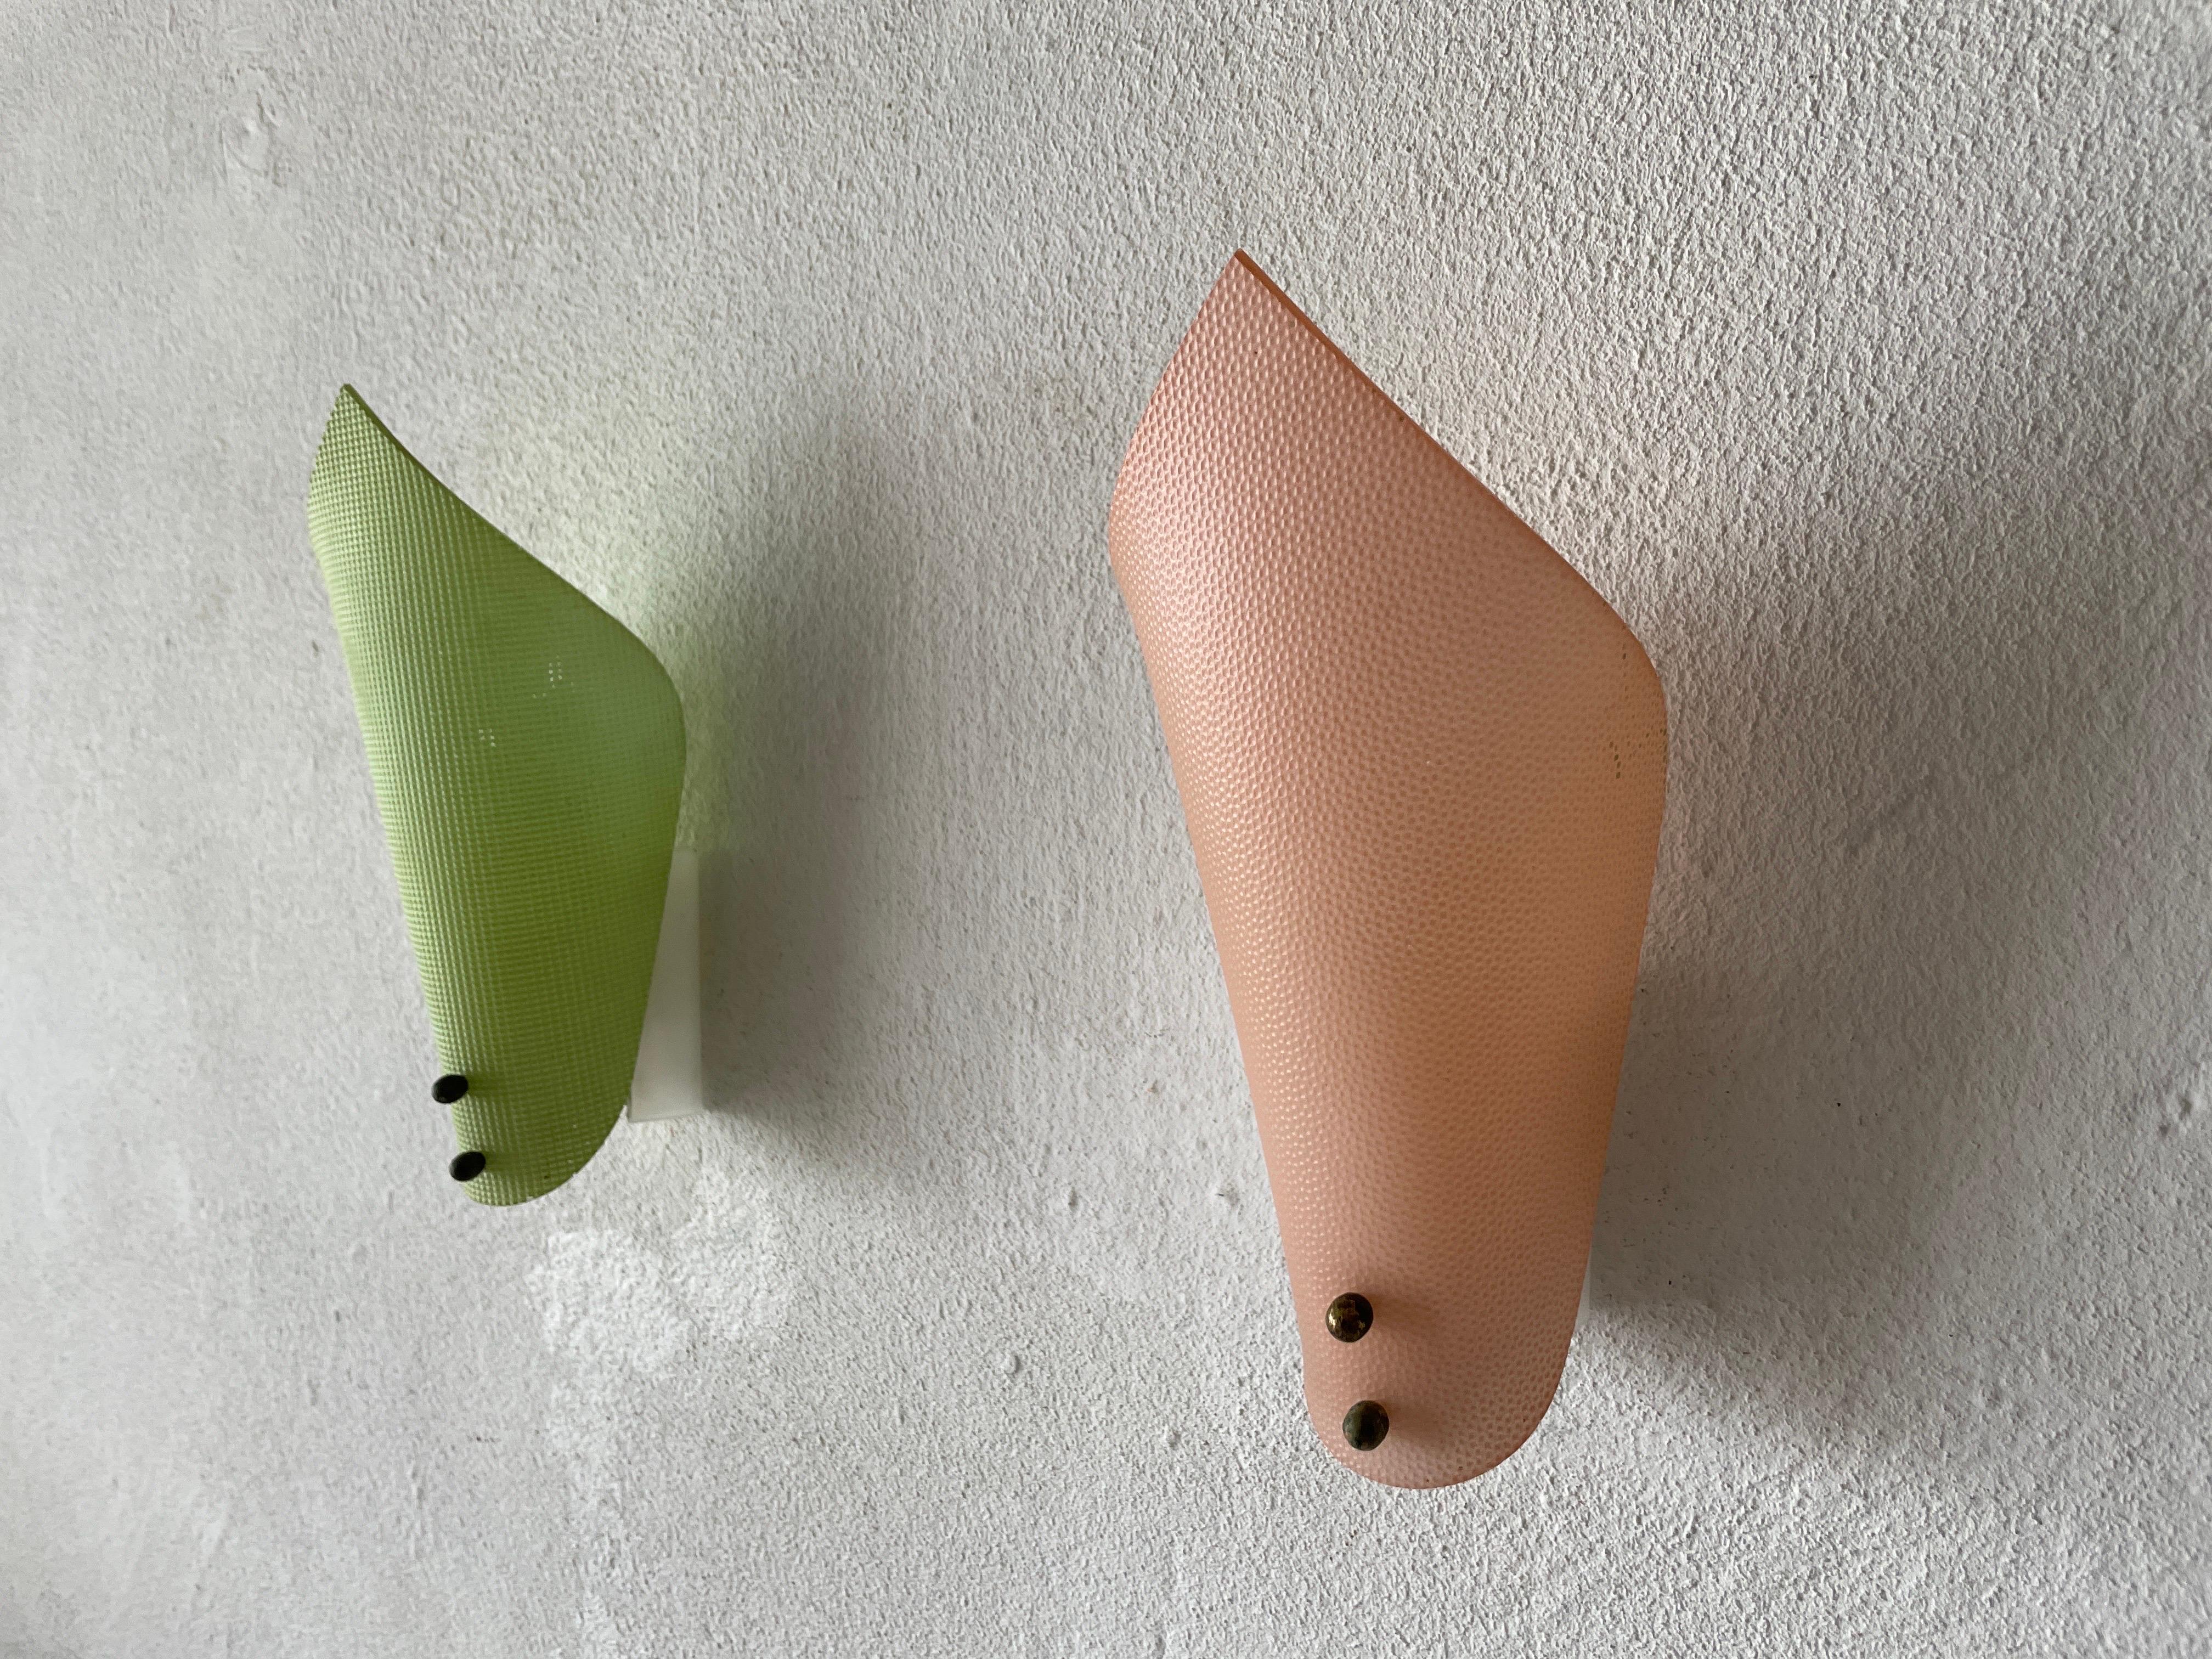 Green & Pink Plexiglass Leaf shaped Pair of Sconces, 1950s, Germany

Very elegant and Minimalist wall lamps.

Lamps are in very good condition.

These lamps works with E14 standard light bulbs. Each lamp works with 1 light bulb. Max 40